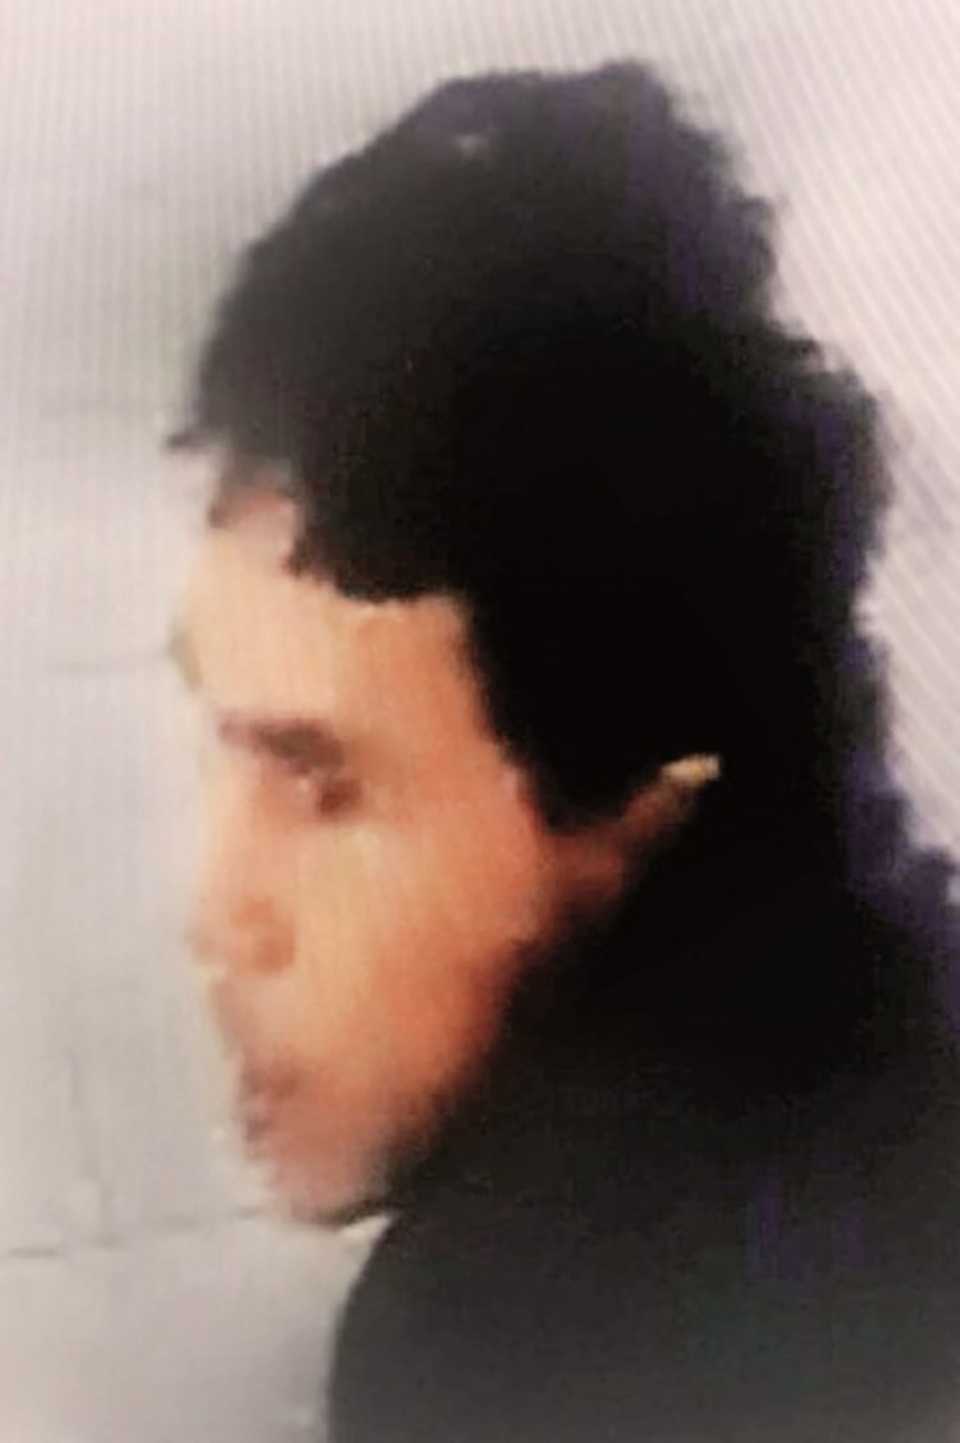 This hand out picture released by the Turkish police on January 2, 2017 shows the main suspect in the Reina nightclub rampage one day after a gunman killed 39 people in an attack at an upmarket nightclub in Istanbul. Source: AFP